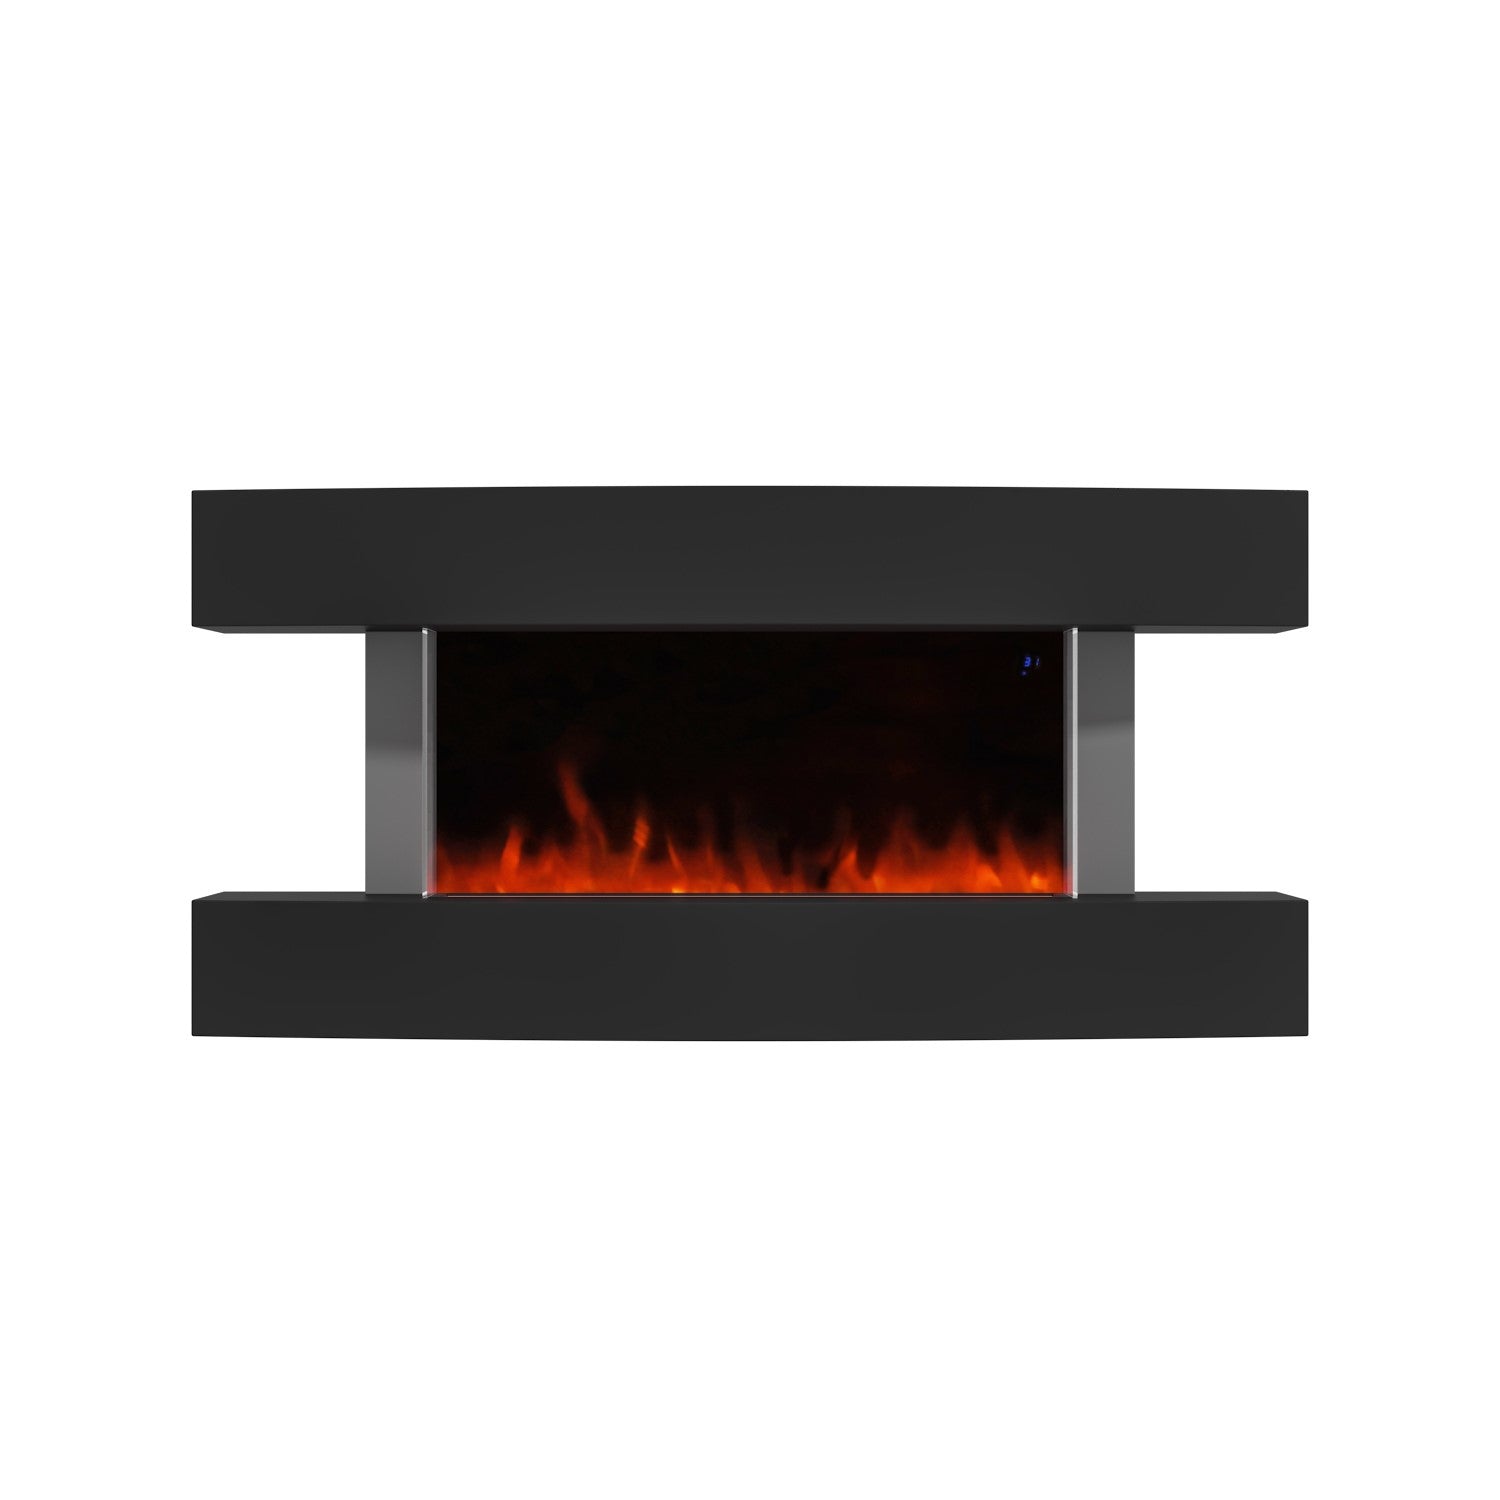 Matt Black Wall Mounted Curved Electric Fire 47 Inch